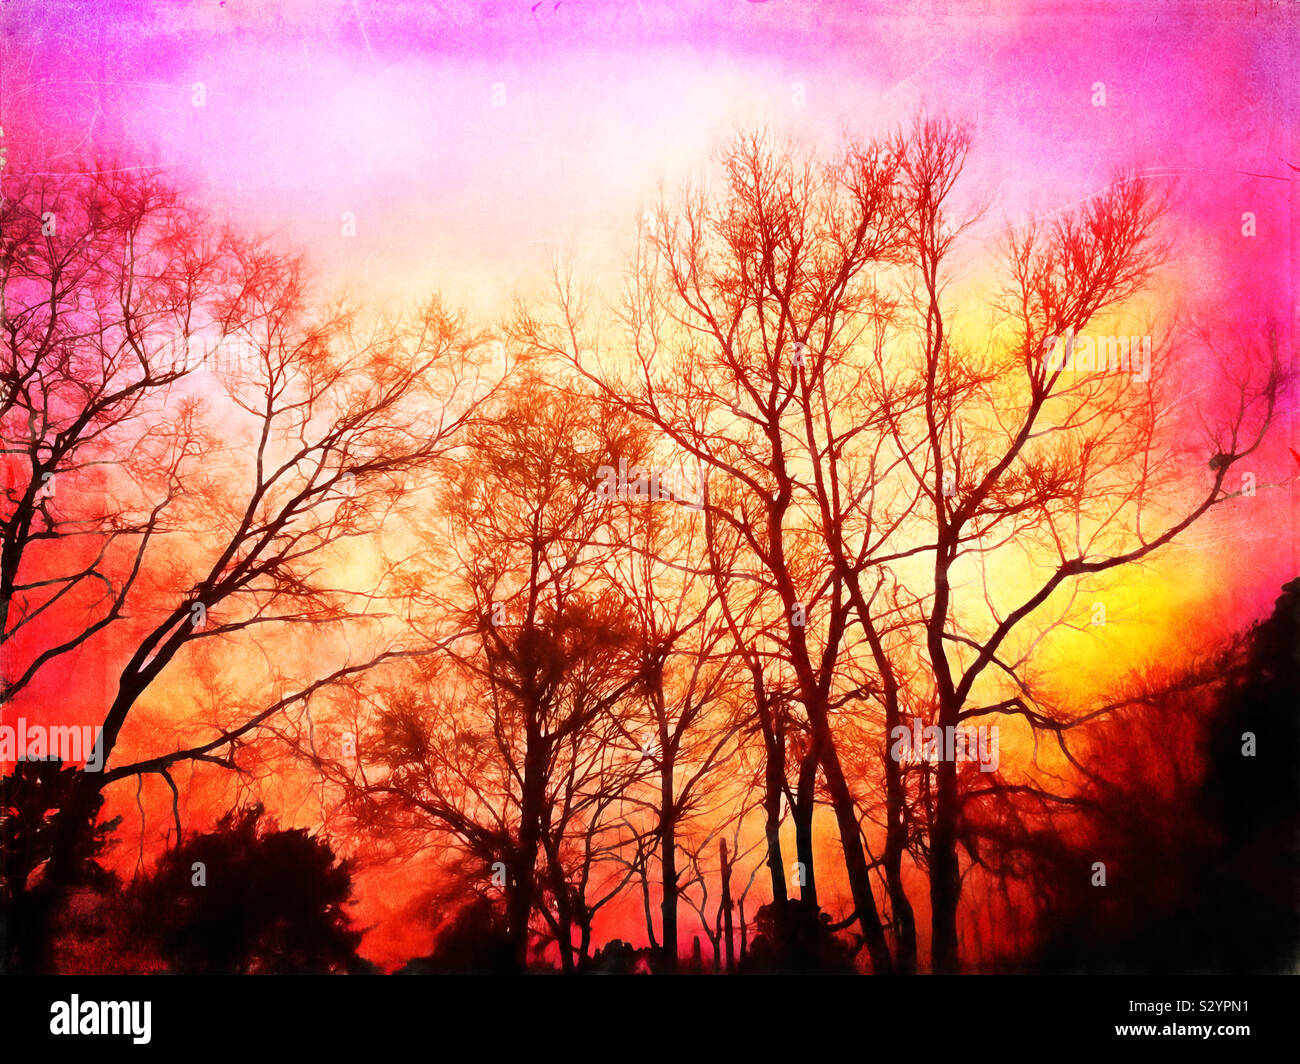 A gorgeous spring season sunrise with deciduous trees in the foreground. This image has a grunge textured effect. Stock Photo